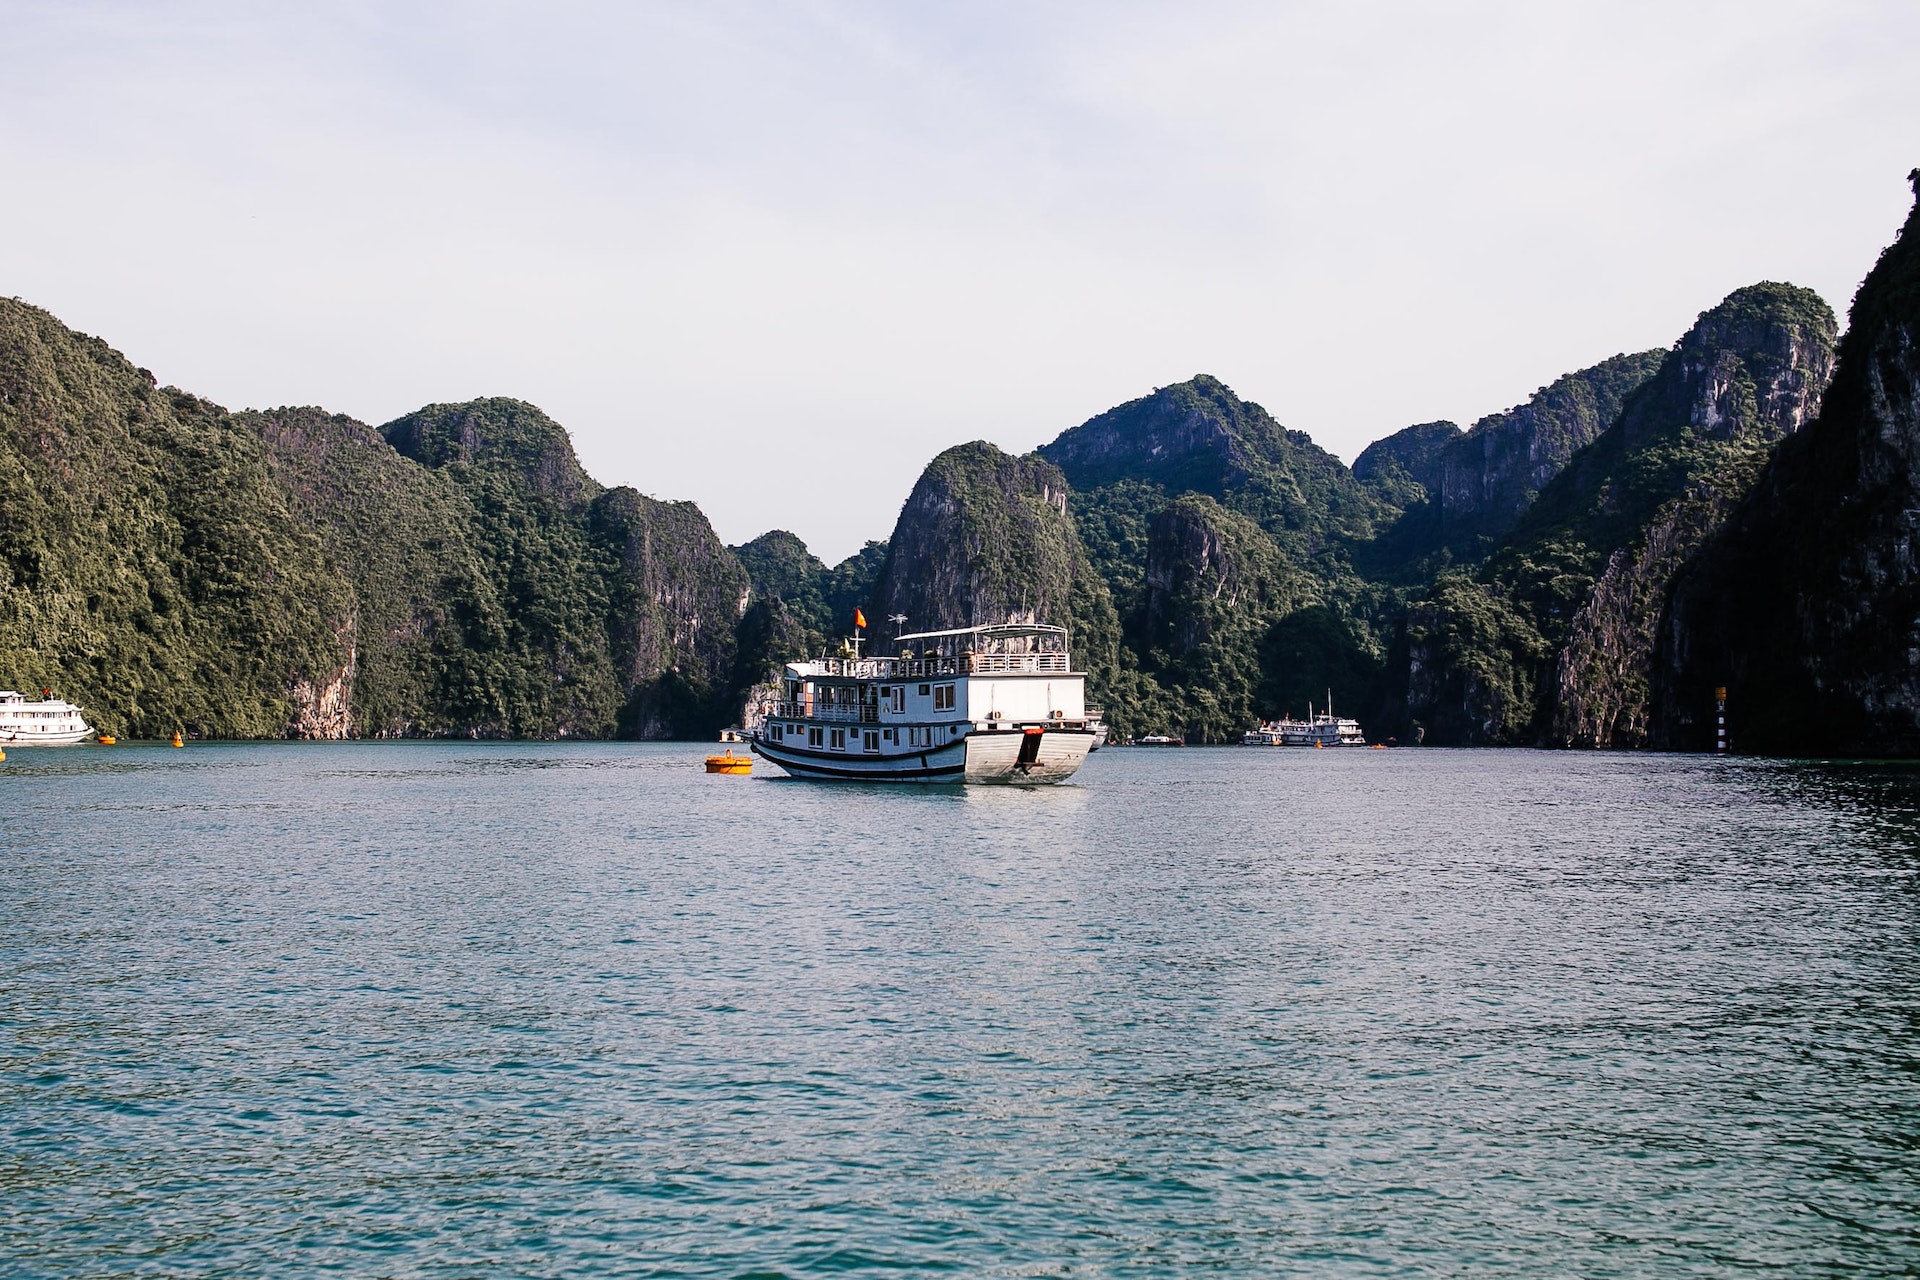 Halong Bay in Vietnam, a popular destination for tourists visiting with Vietnam tour packages from Singapore.